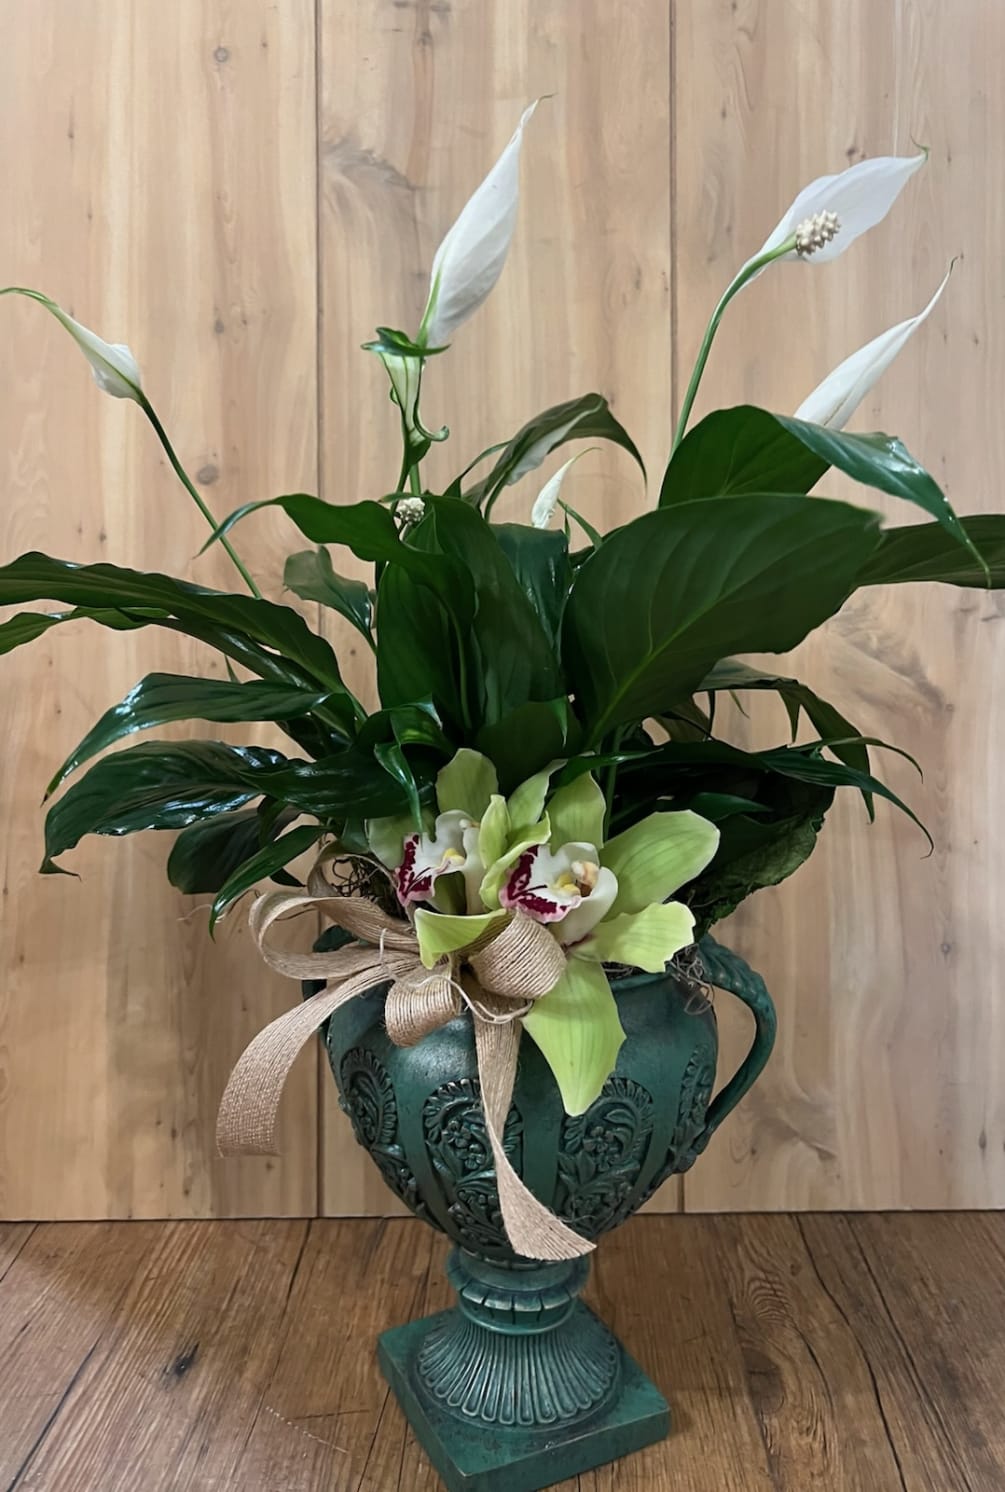 A beautiful Peace Lily (Spathiphyllum) with accents of green cymbidium orchids in